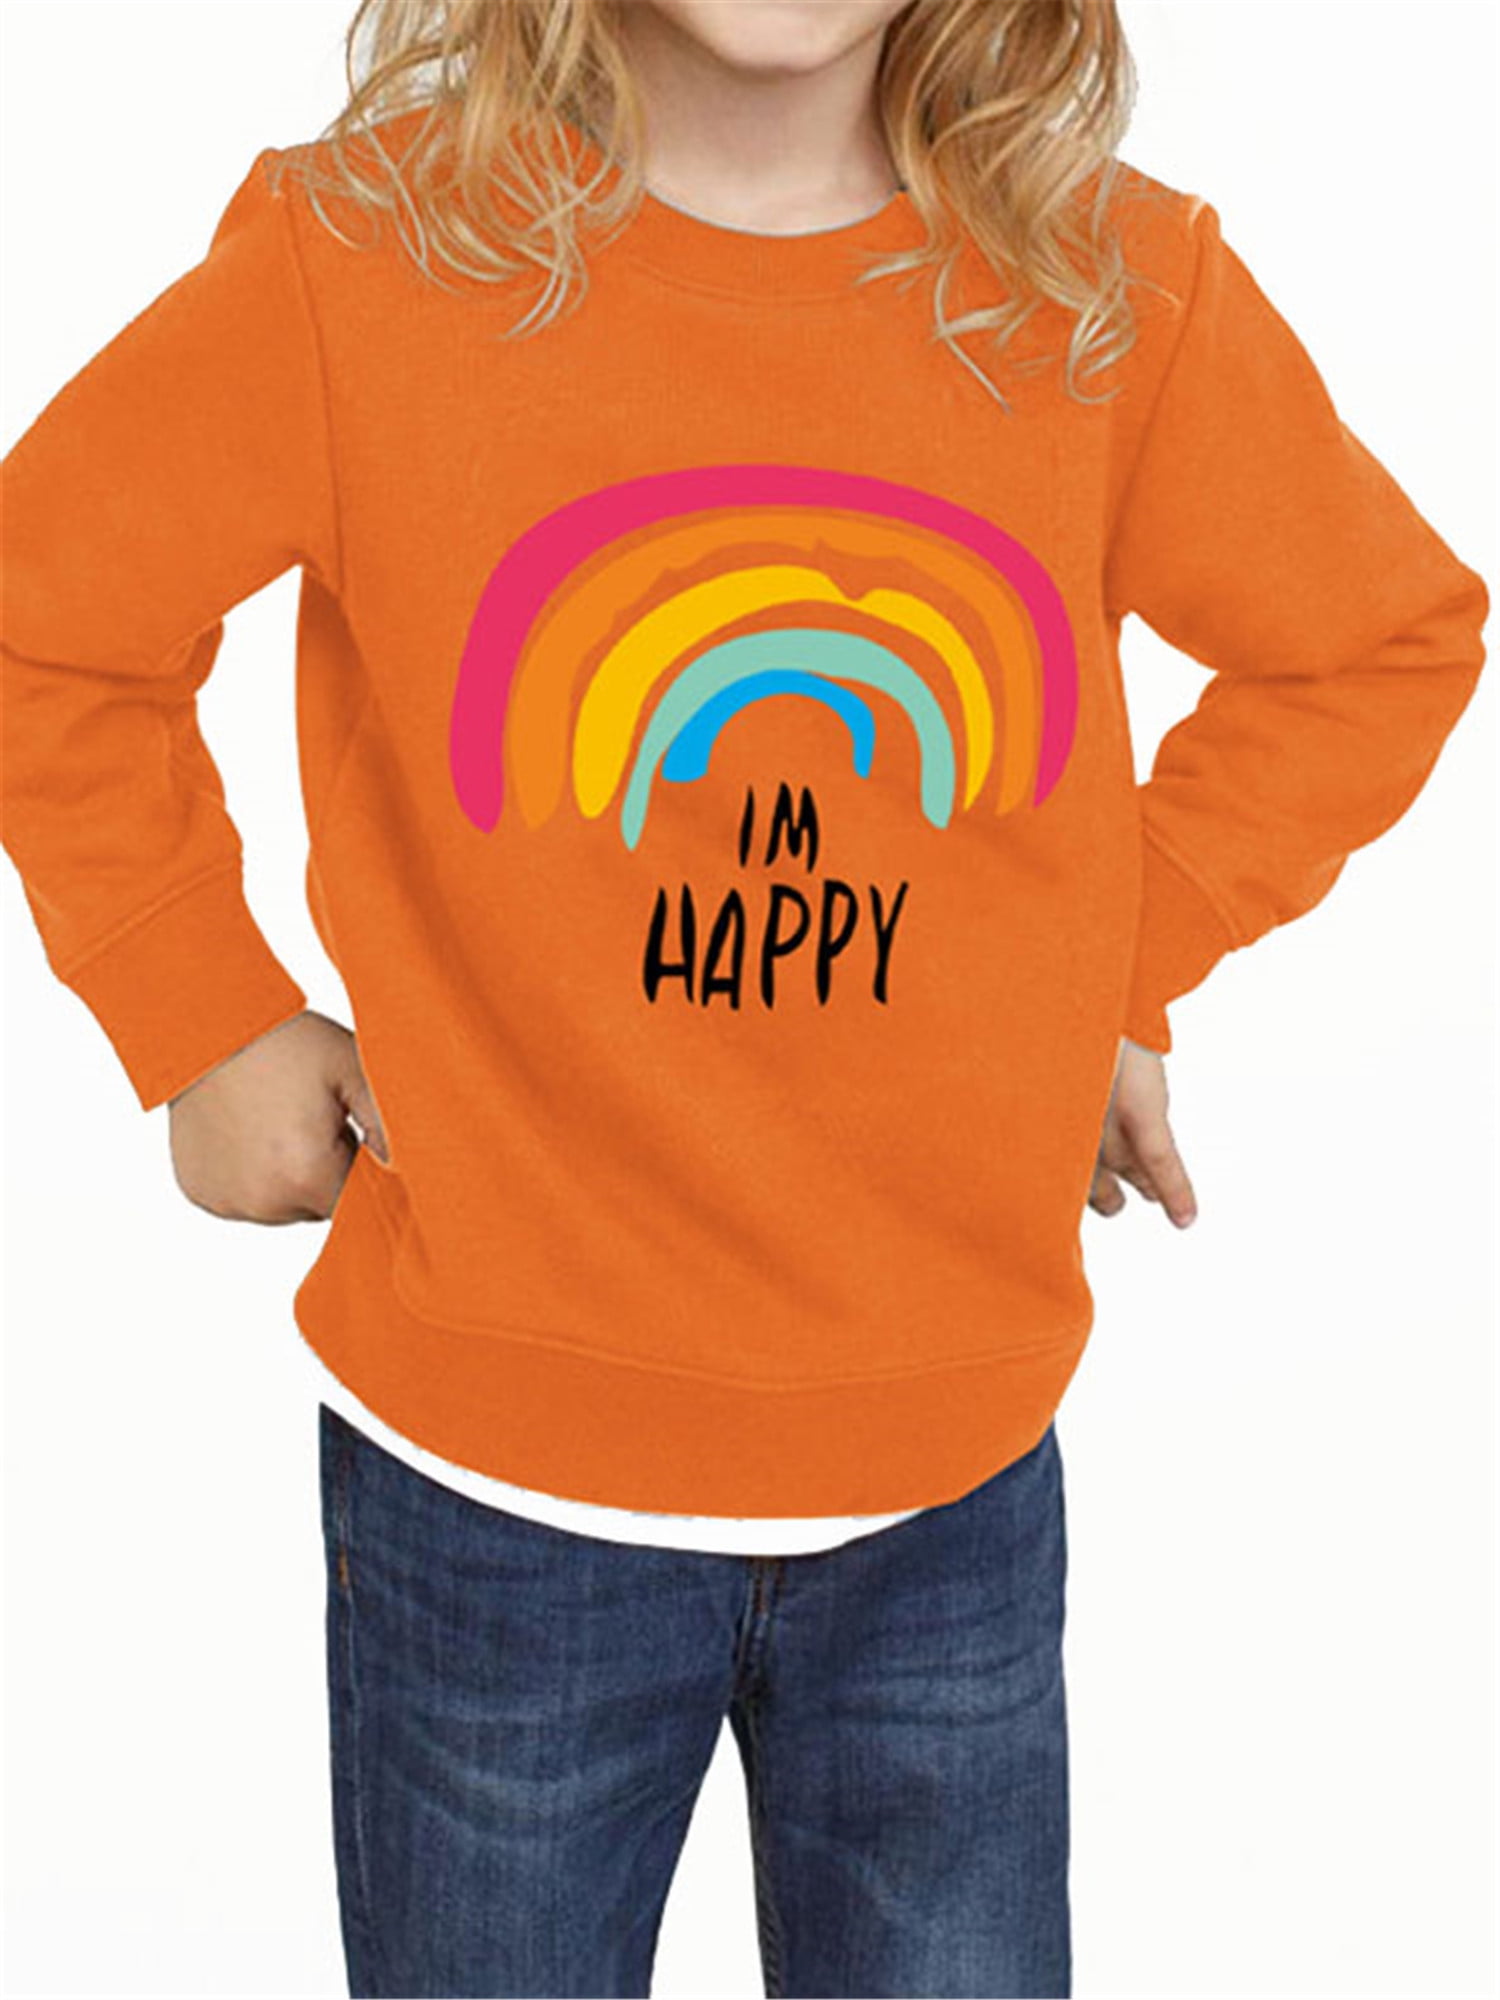 Toddller Kids Autumn Rainbow Top Blouse Long Sleeve Pullover Casual Sweatshirt for Unisex Baby 